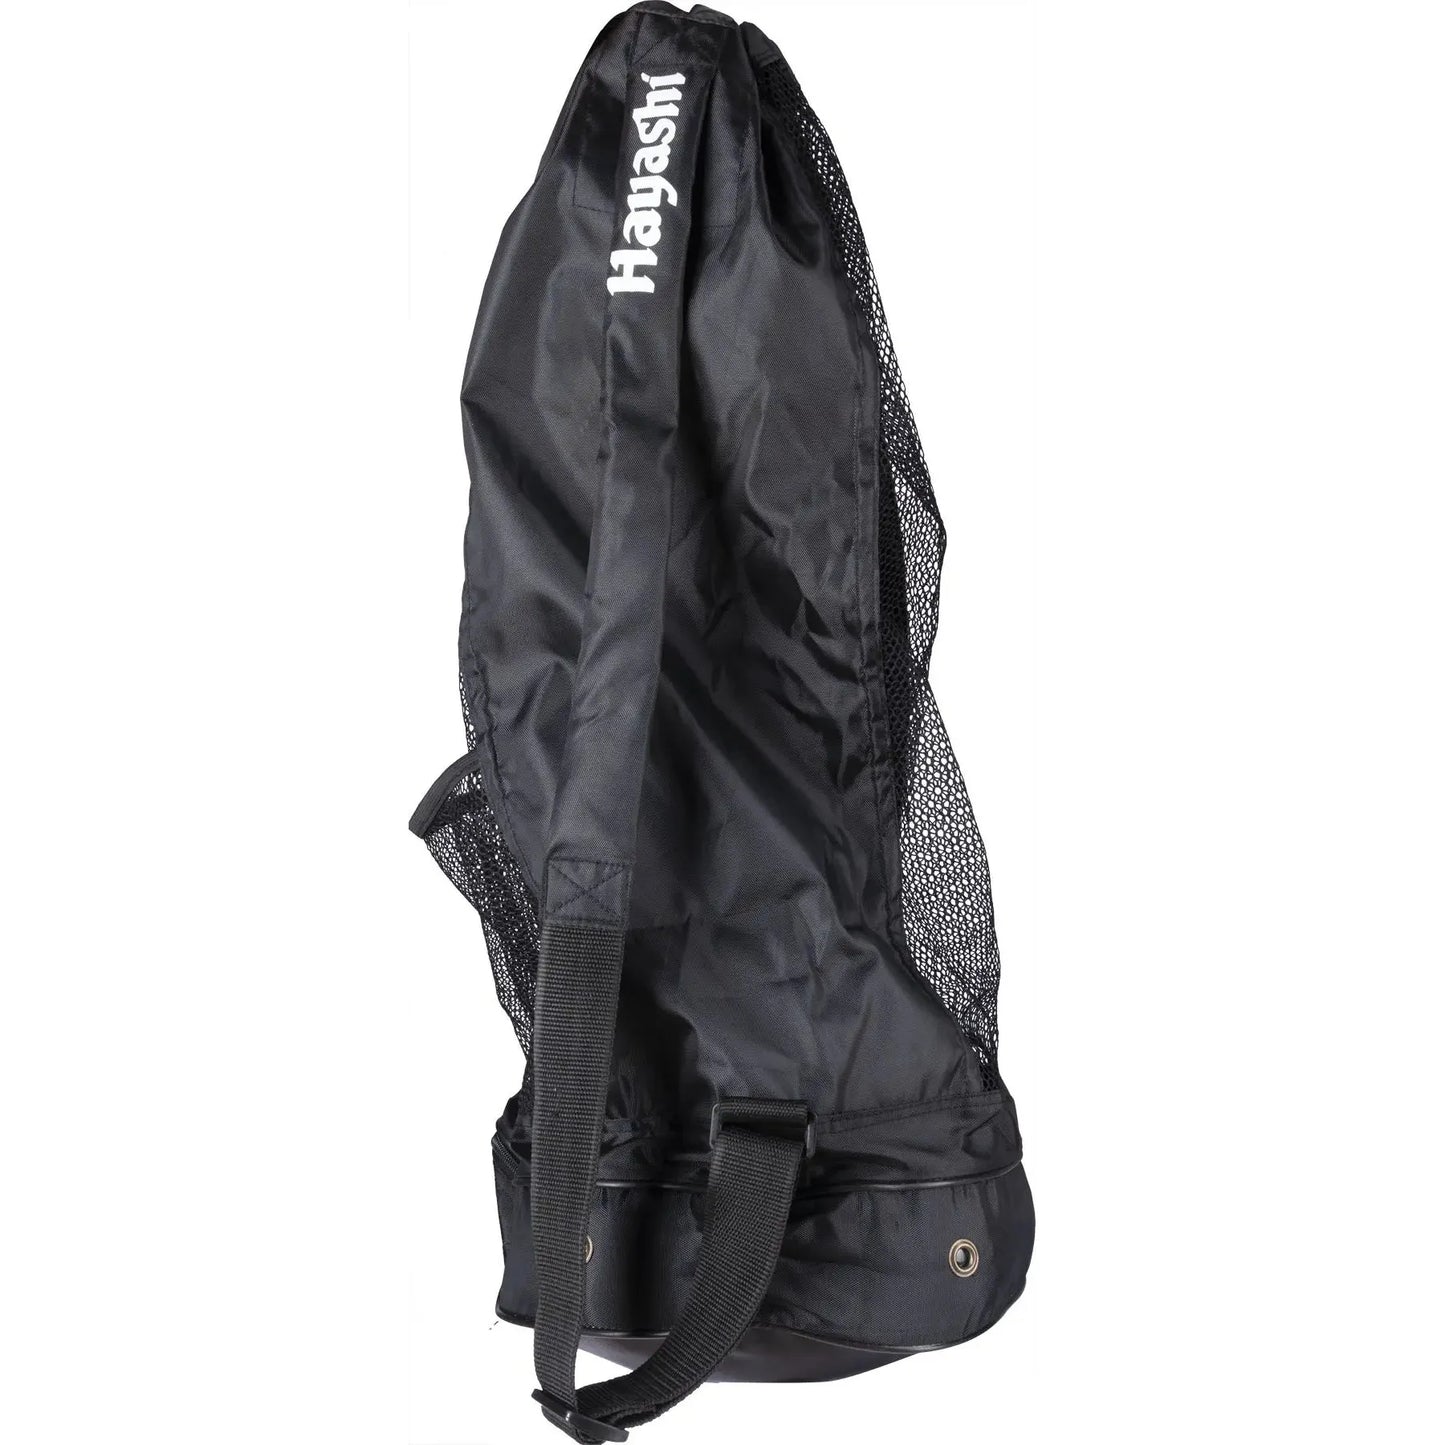 Easy to hold strap at the bag. Light Weight Karate Gear Bag